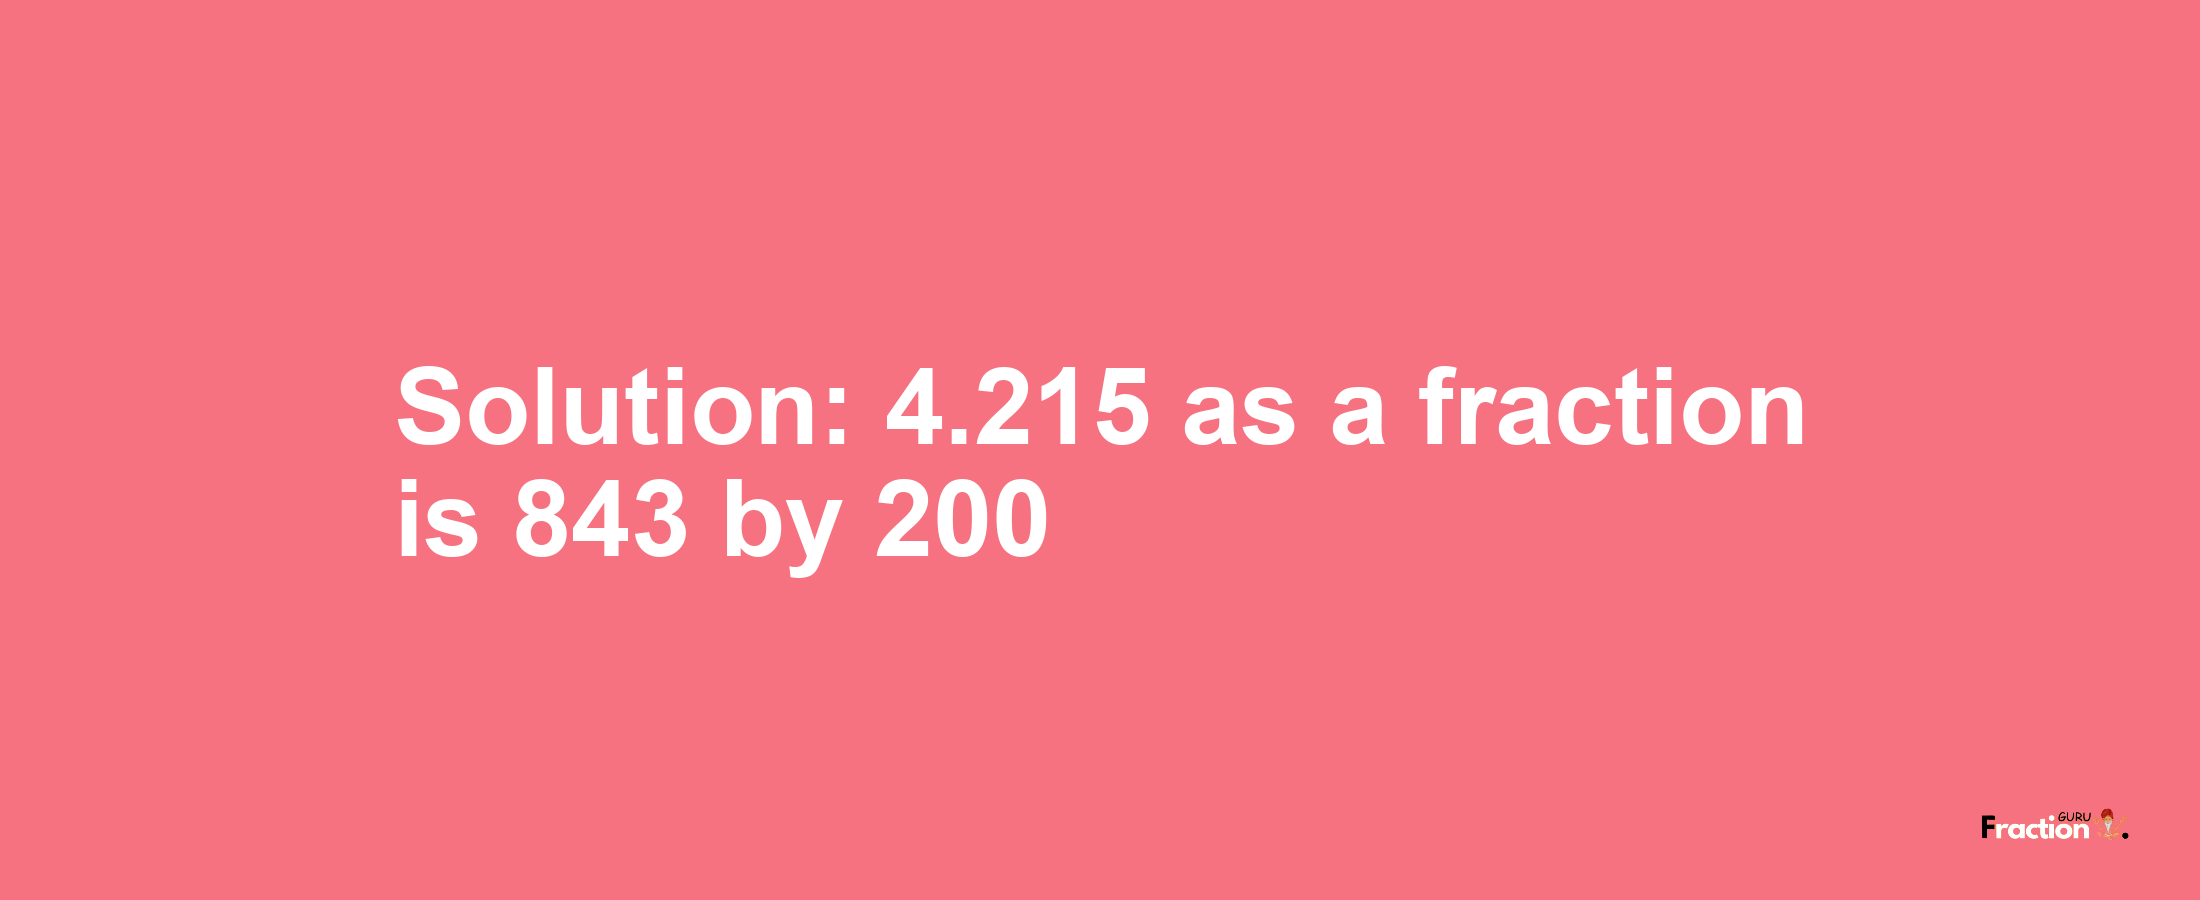 Solution:4.215 as a fraction is 843/200